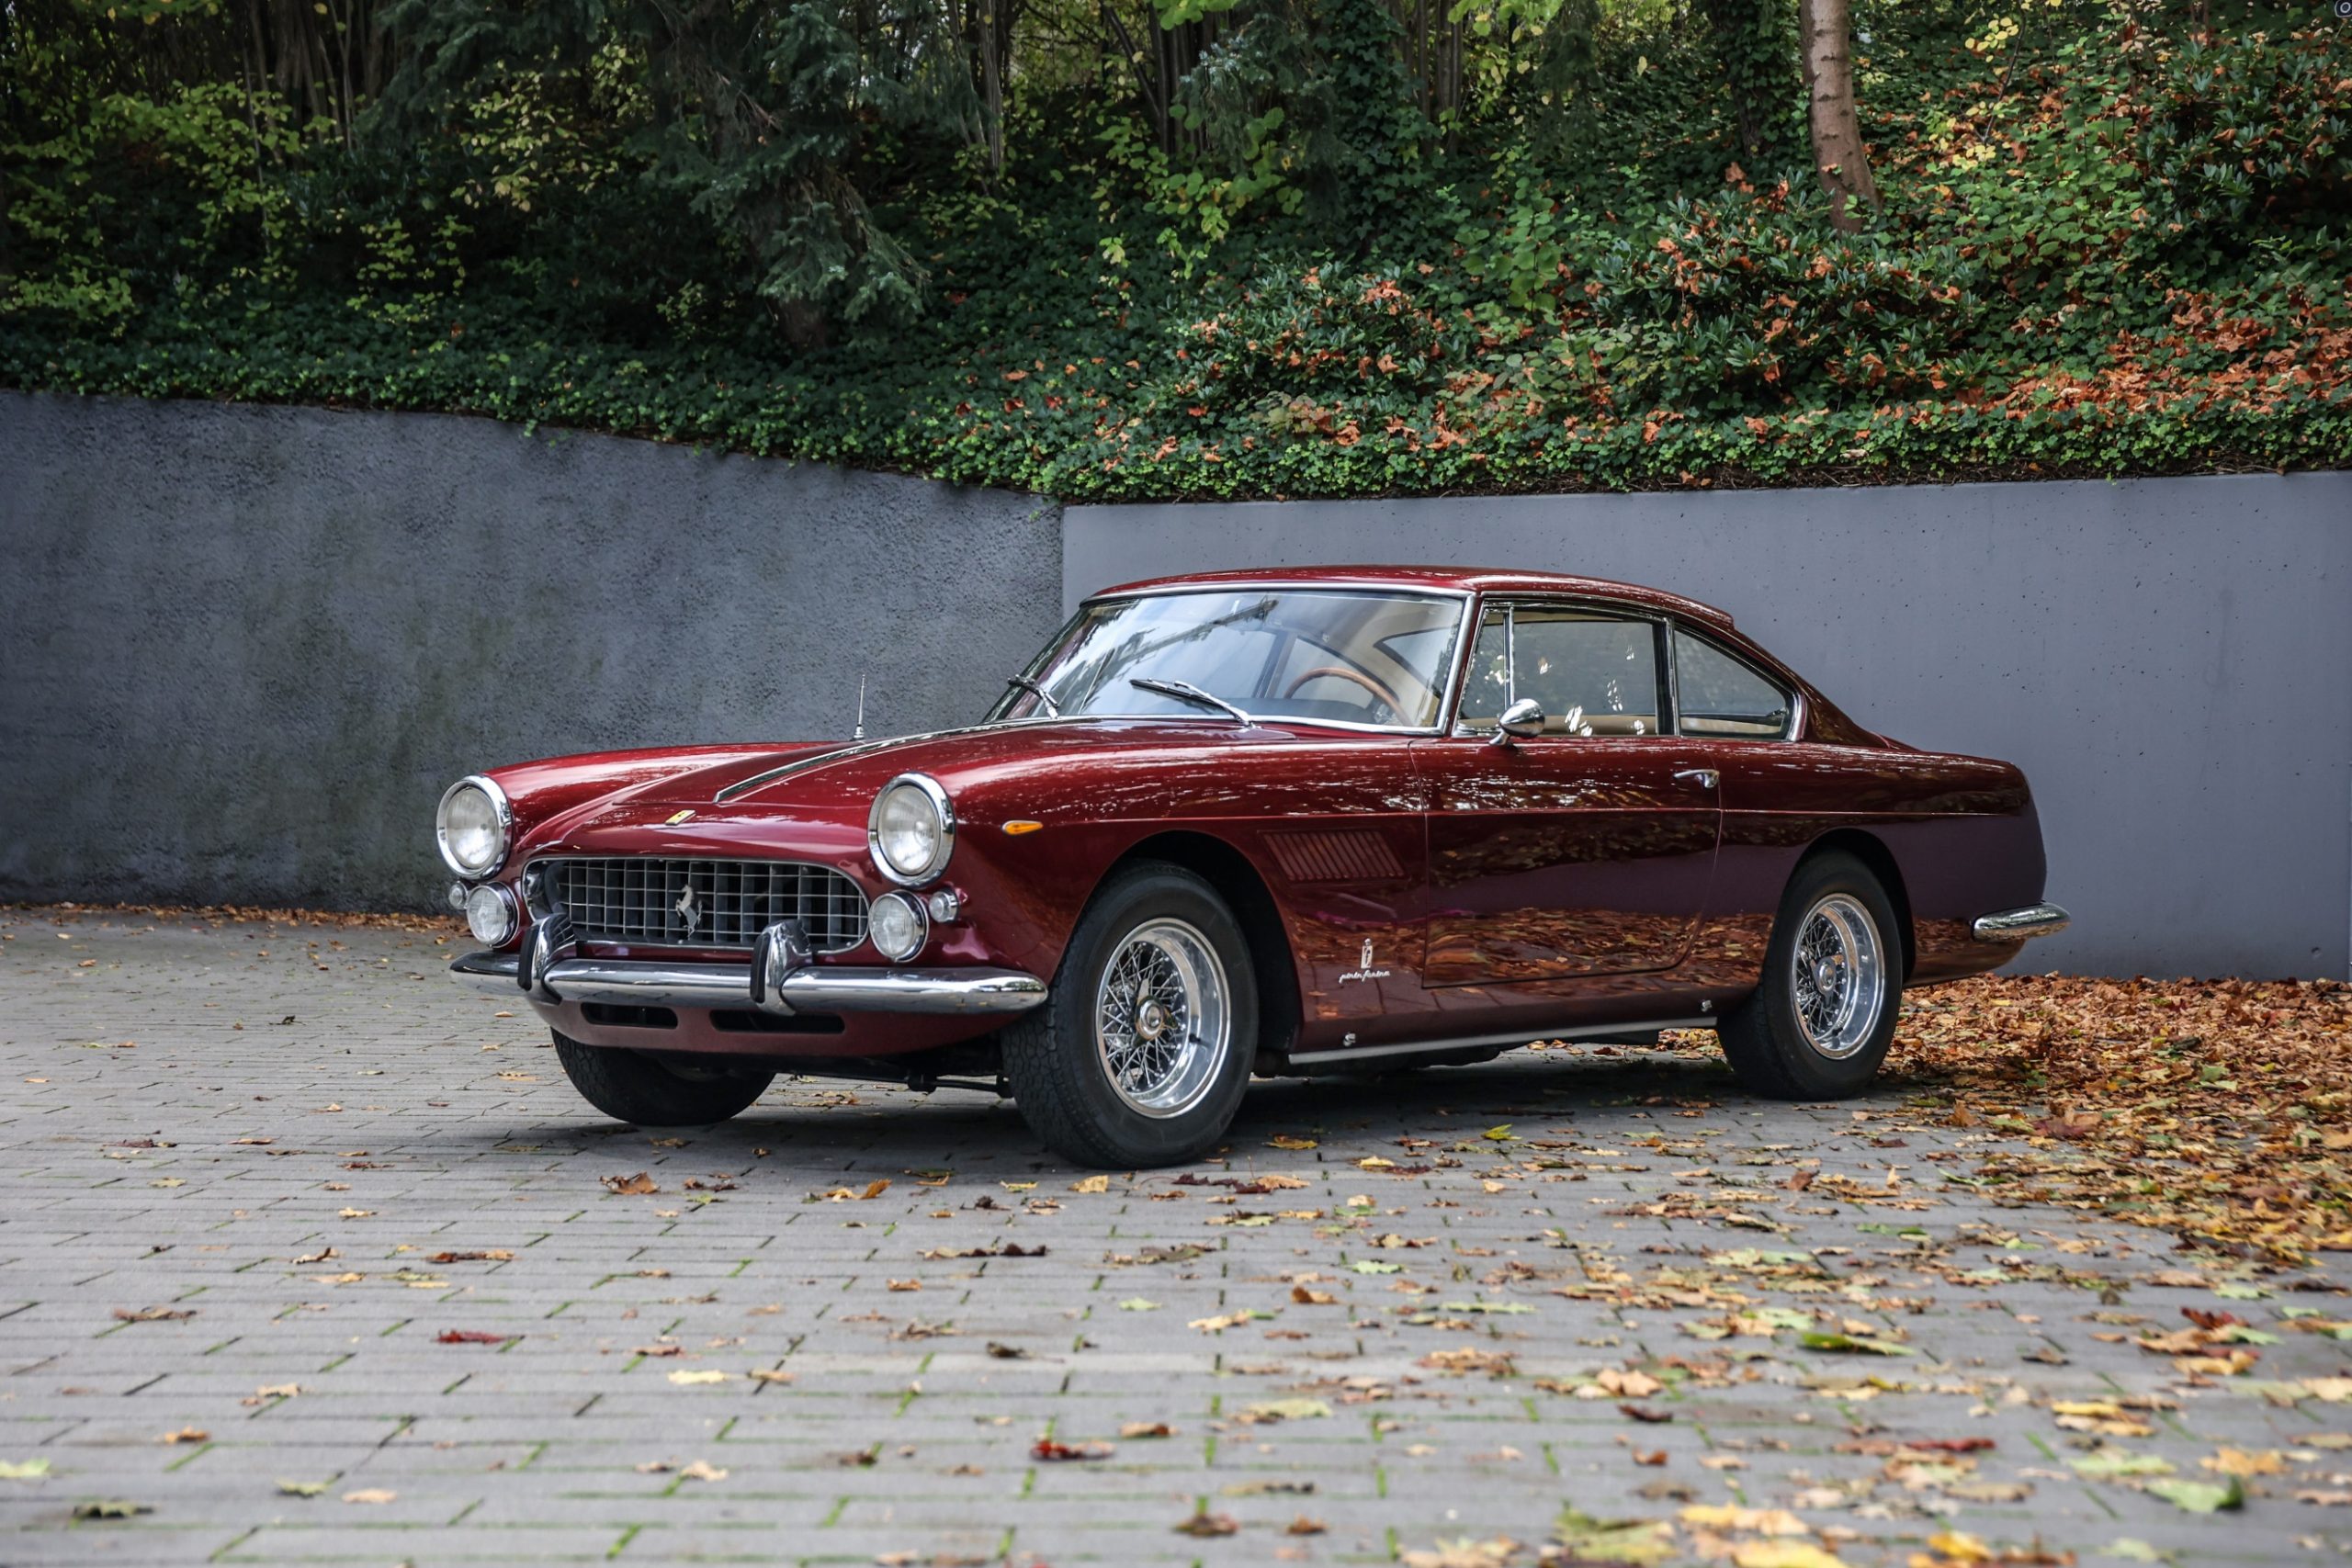 221115 RM Sotheby's Munich Auction - Courtesy of RM Sotheby's - image007